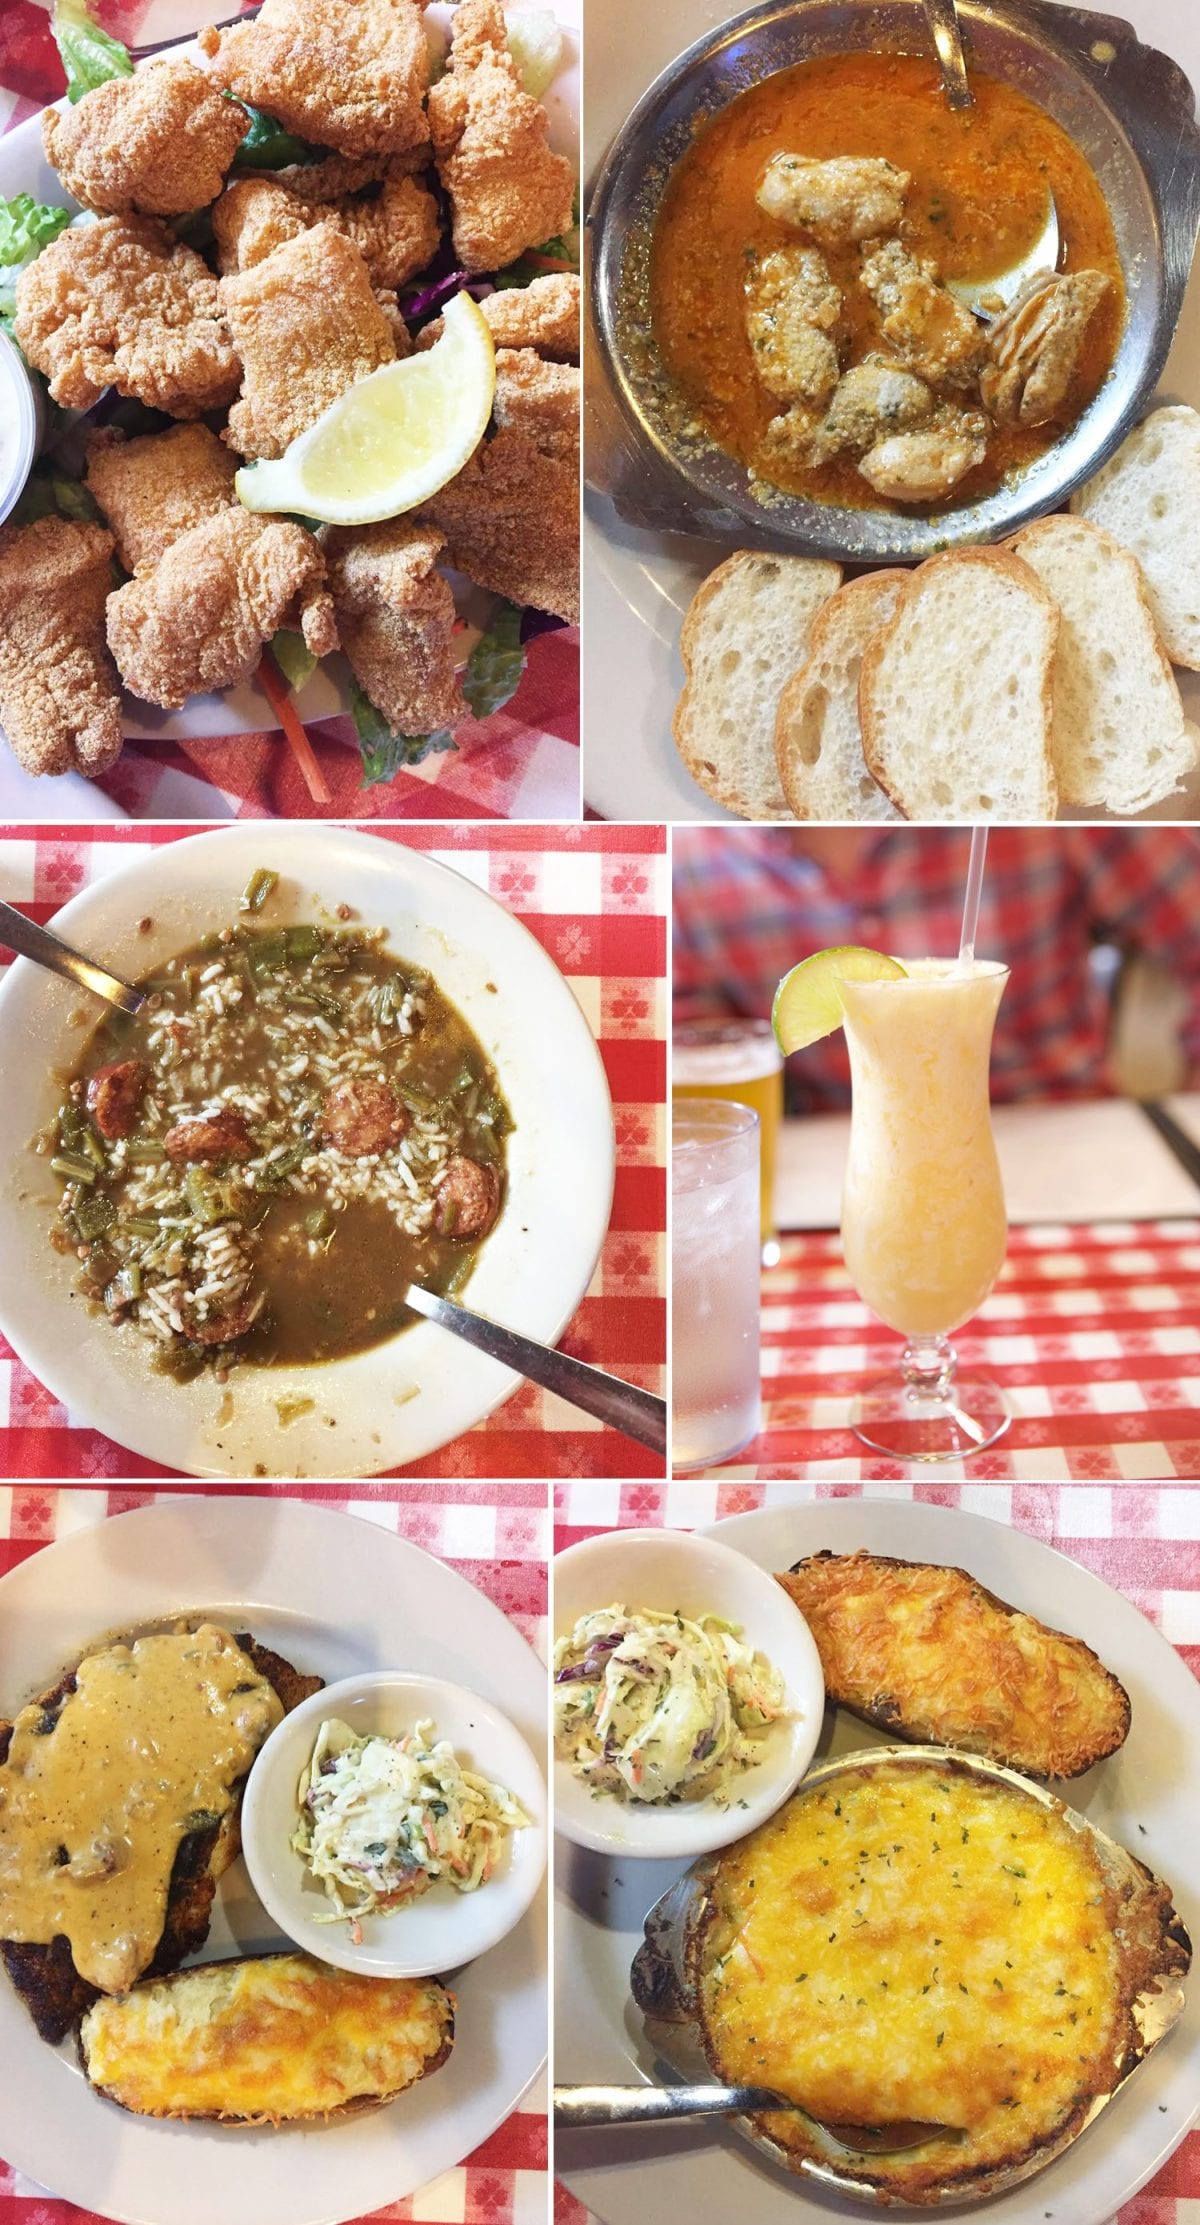 Where to eat in New Orleans - Mulate's